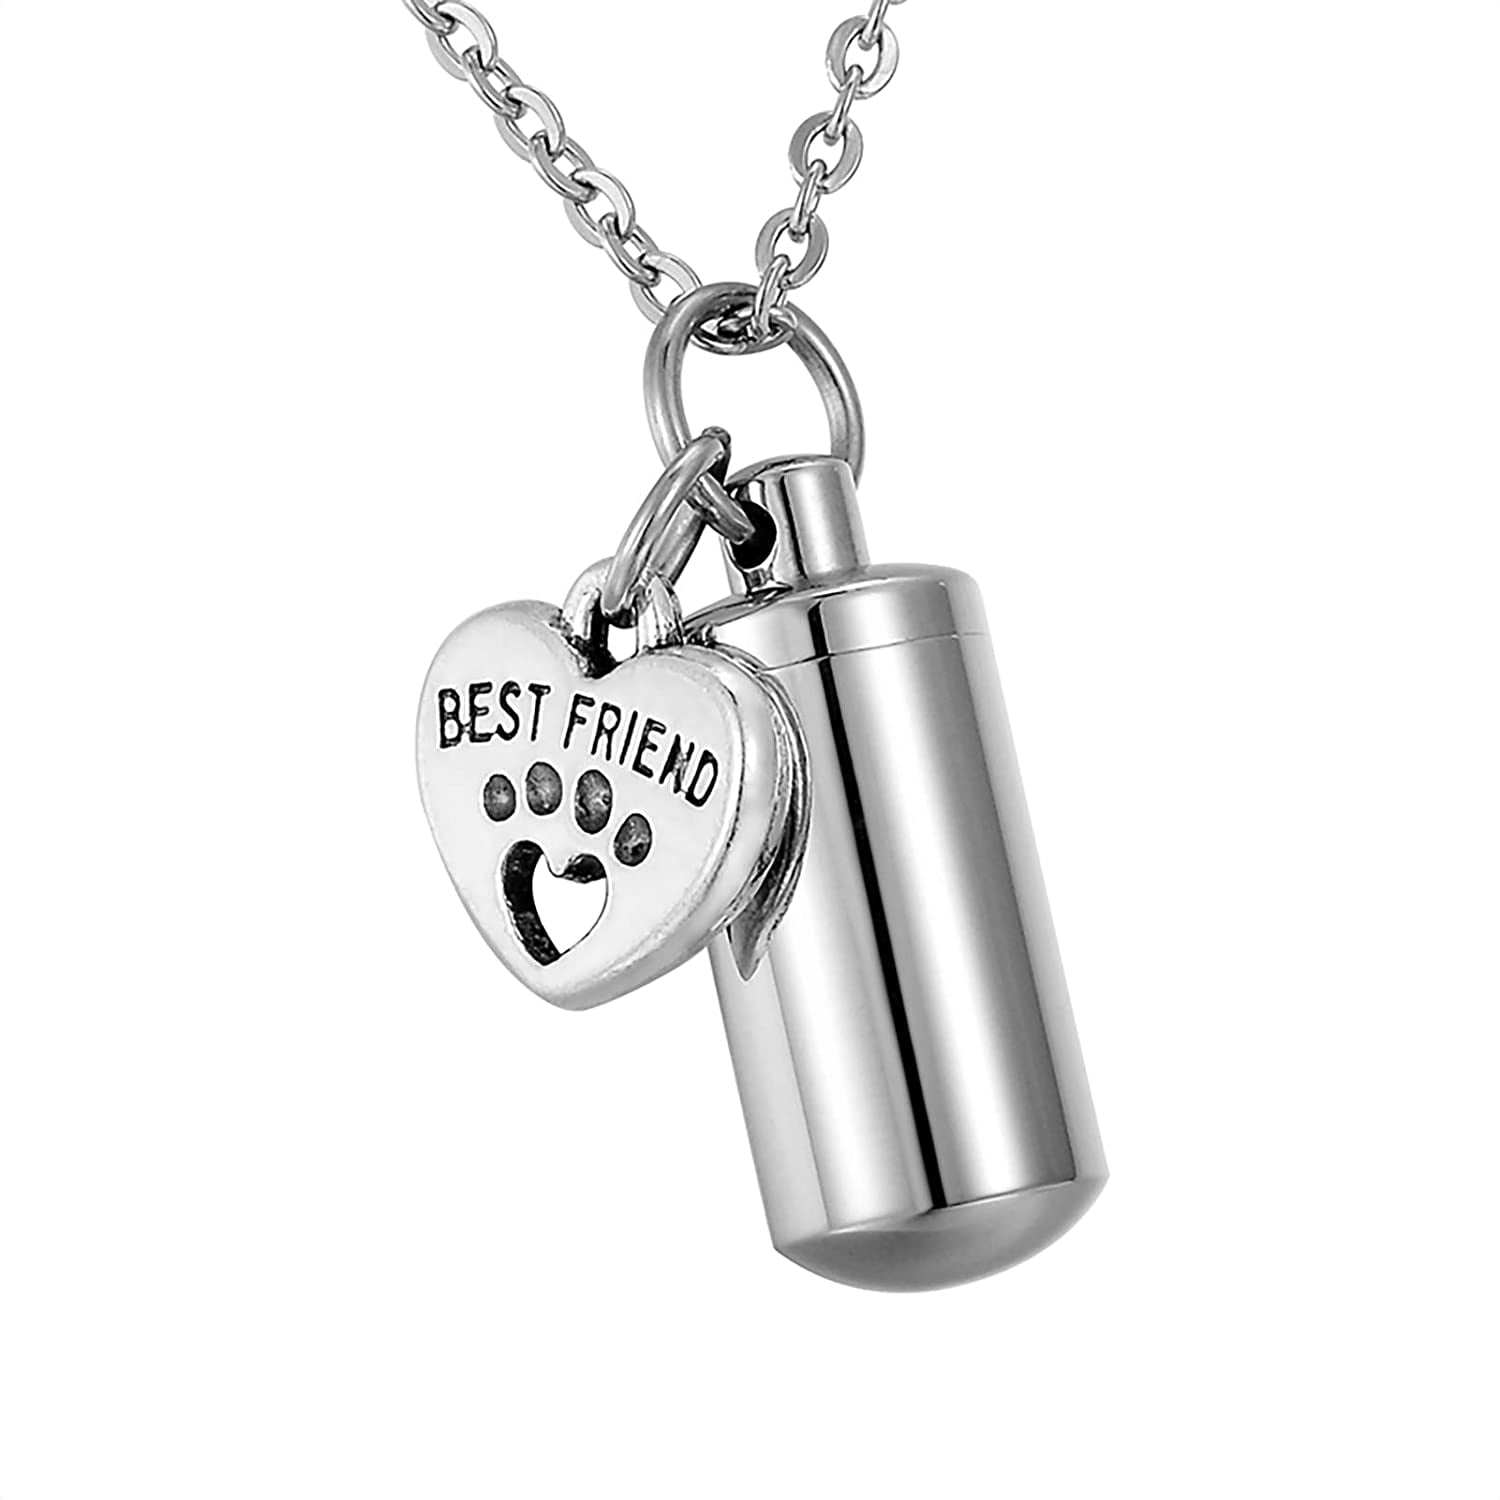 HooAMI Cremation Jewelry for Ashes Pet Tree Charm Bottle Urn Necklace Memorial Keepsake Keychain 